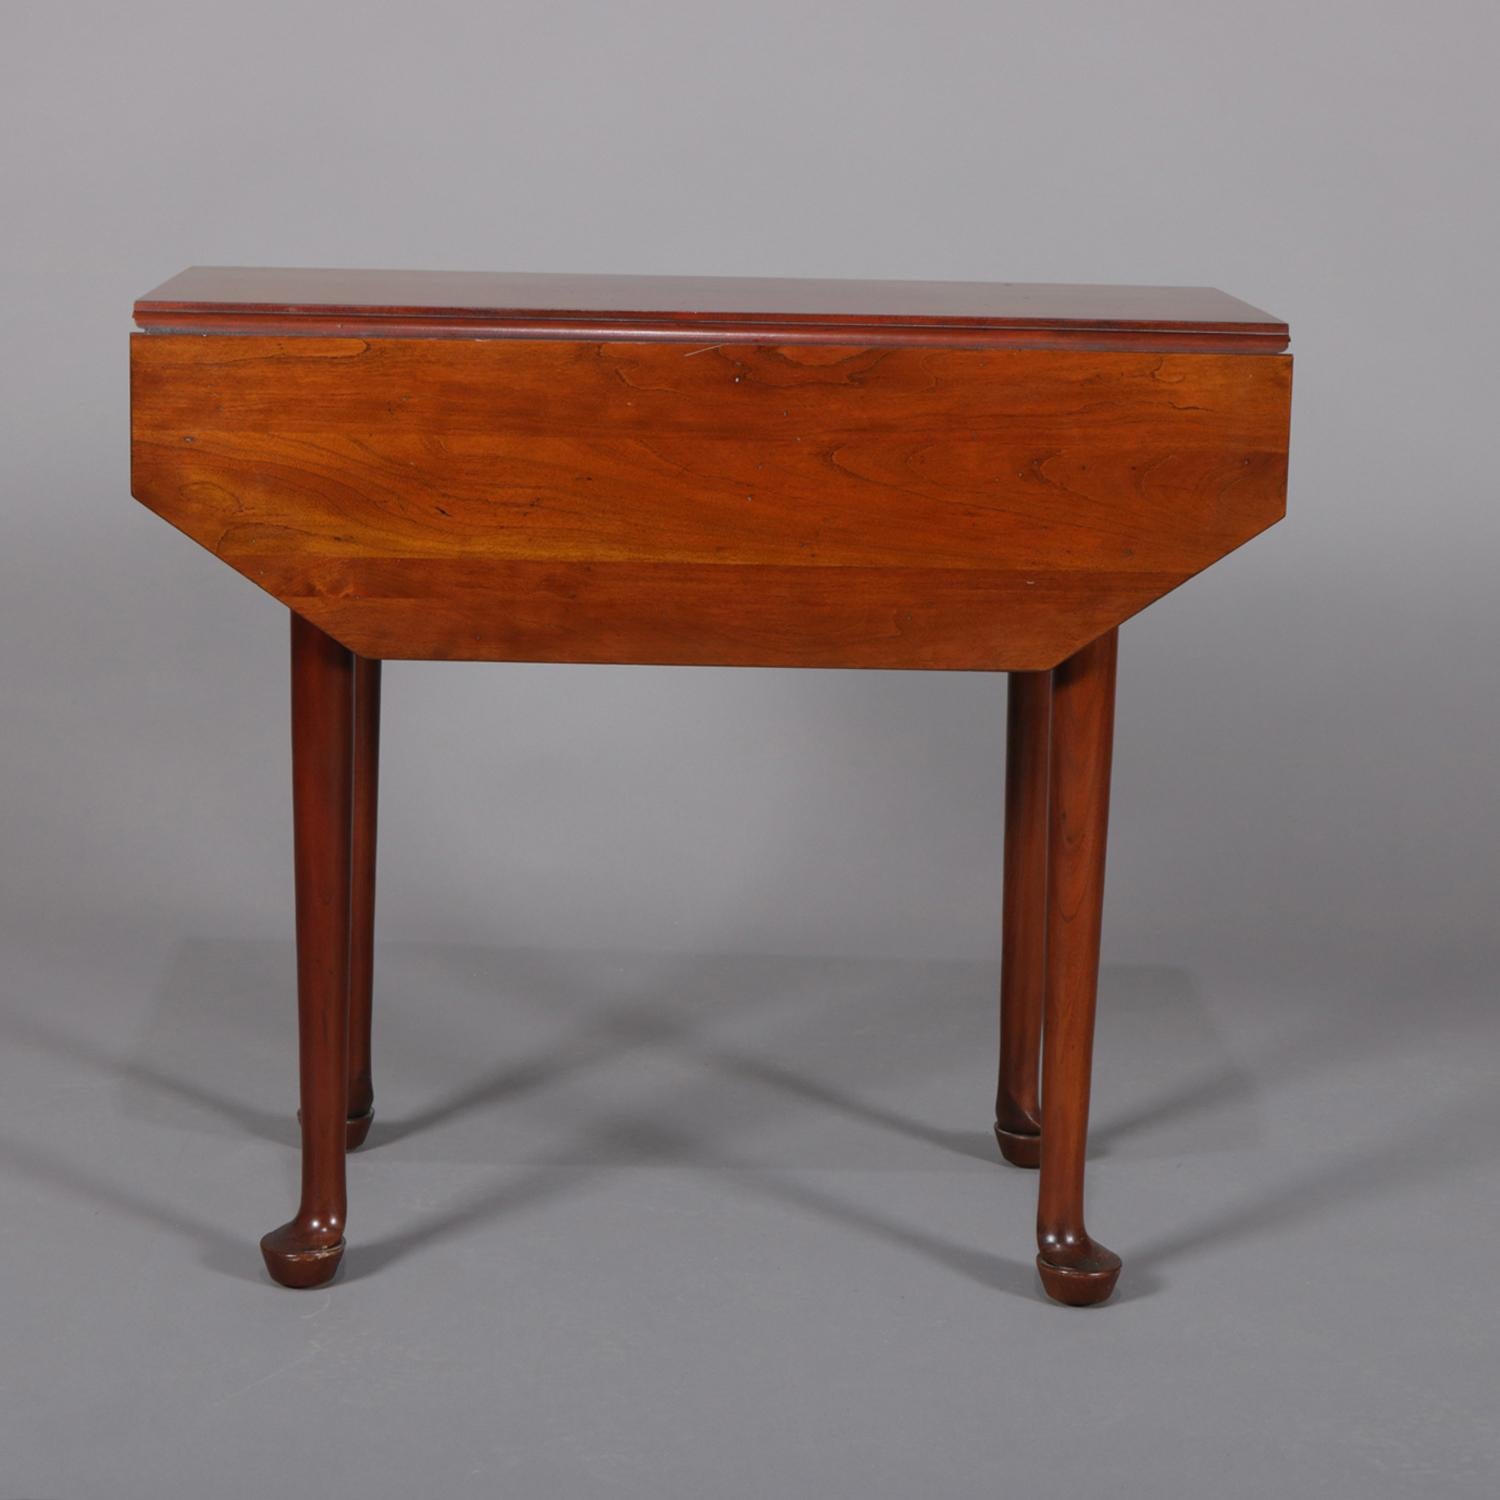 Antique Queen Anne pembroke table features mahogany construction with clip corner and drop leaf top raised on tapered legs with pad feet, circa 1890.

Measures: 25.5